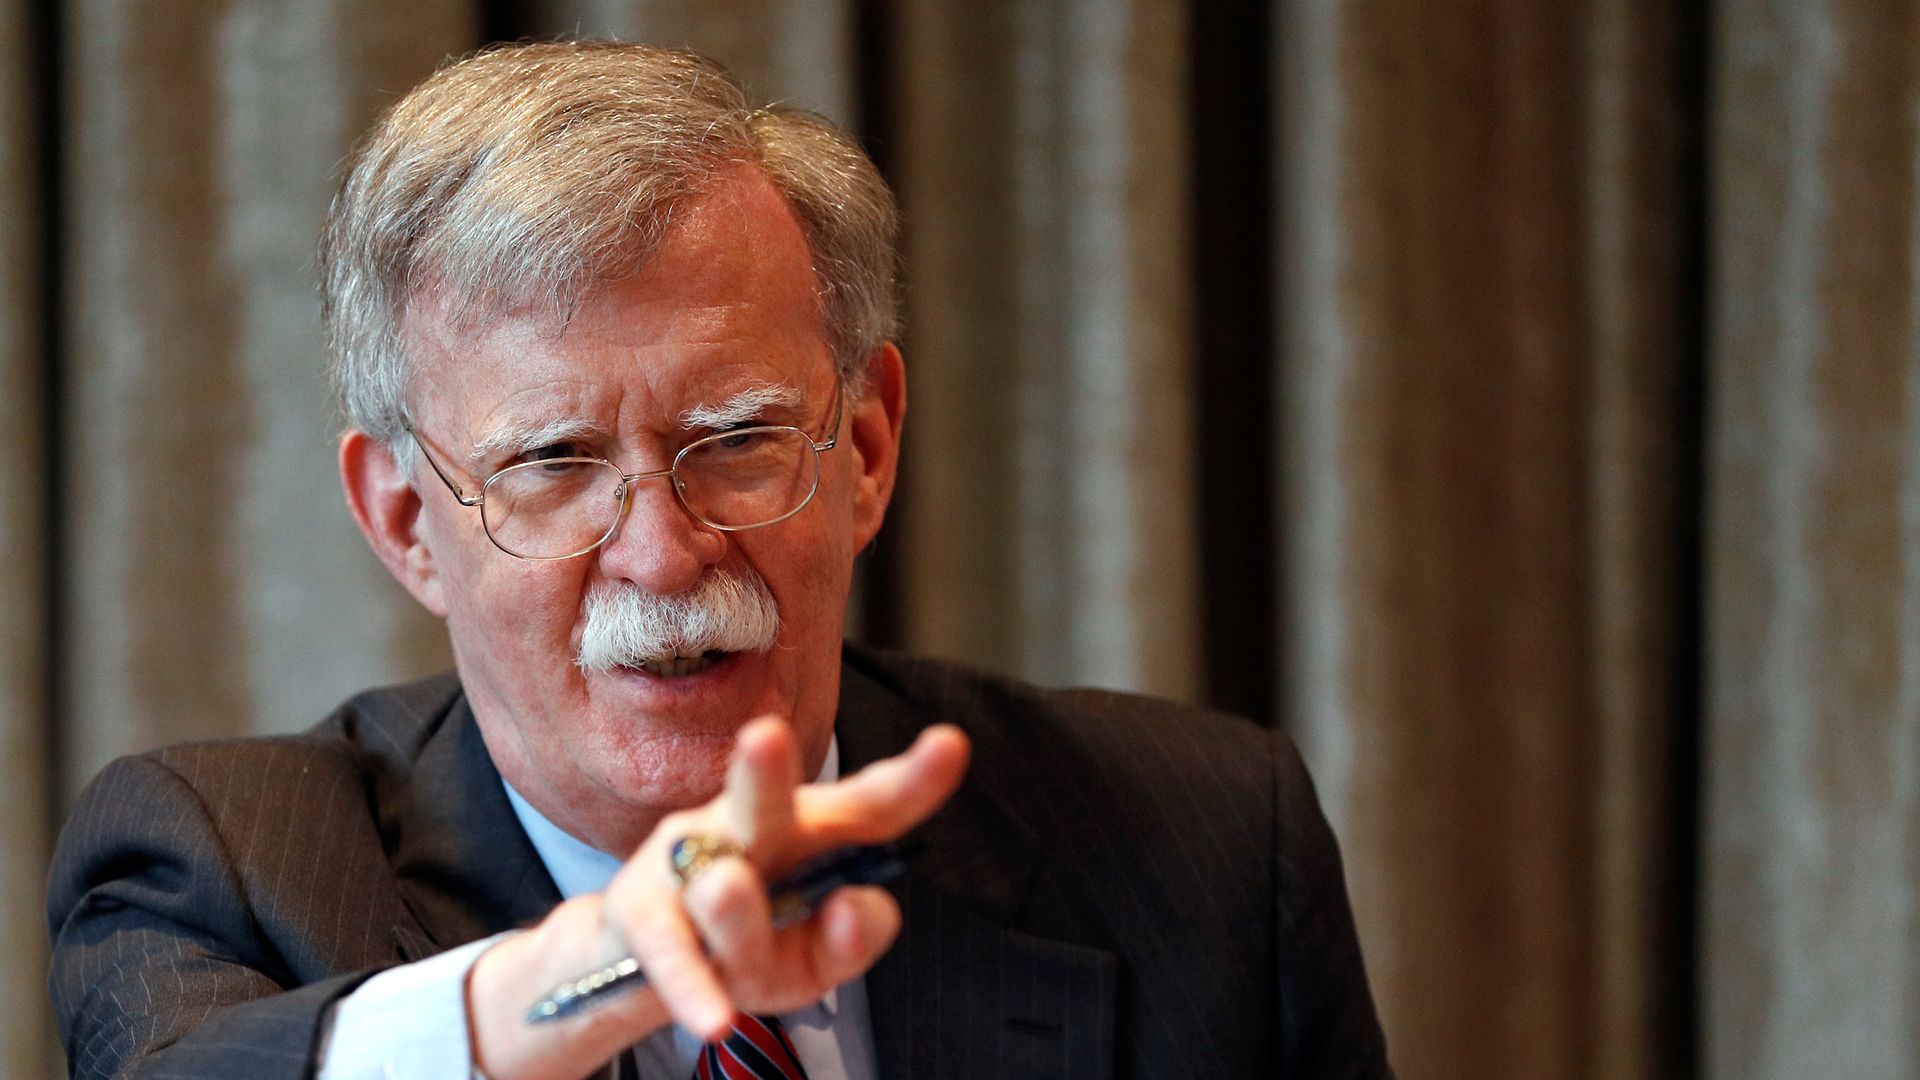 U.S. National Security Advisor, John Bolton, gestures as he meets with journalists during a visit to London